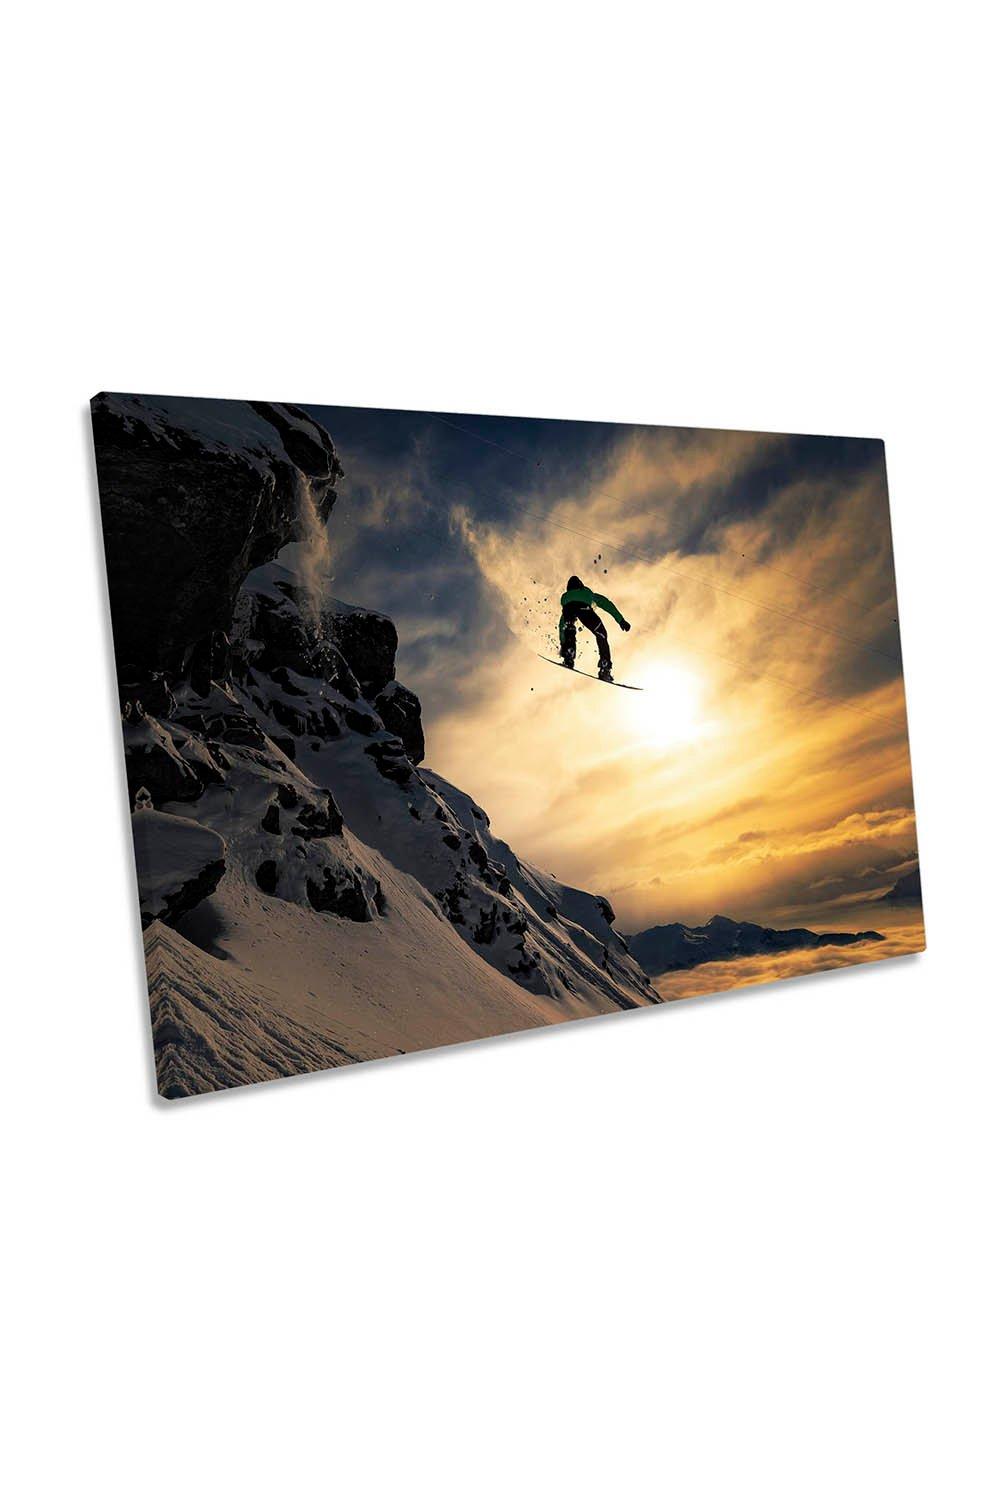 Sunset Snowboarding Extreme Sports Canvas Wall Art Picture Print